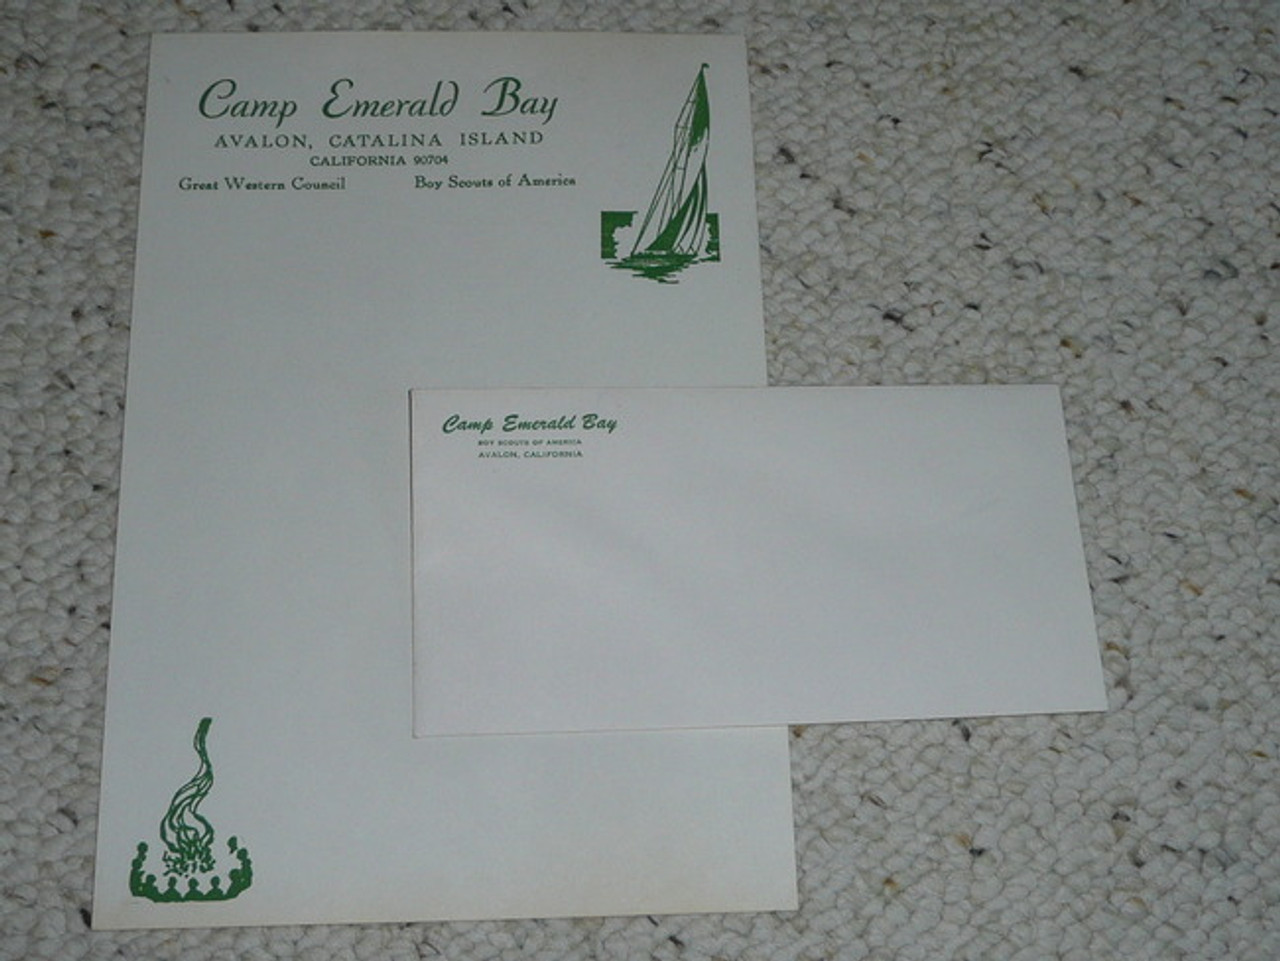 Great Western Council, 1970's Camp Emerald Bay Stationary and Envelope